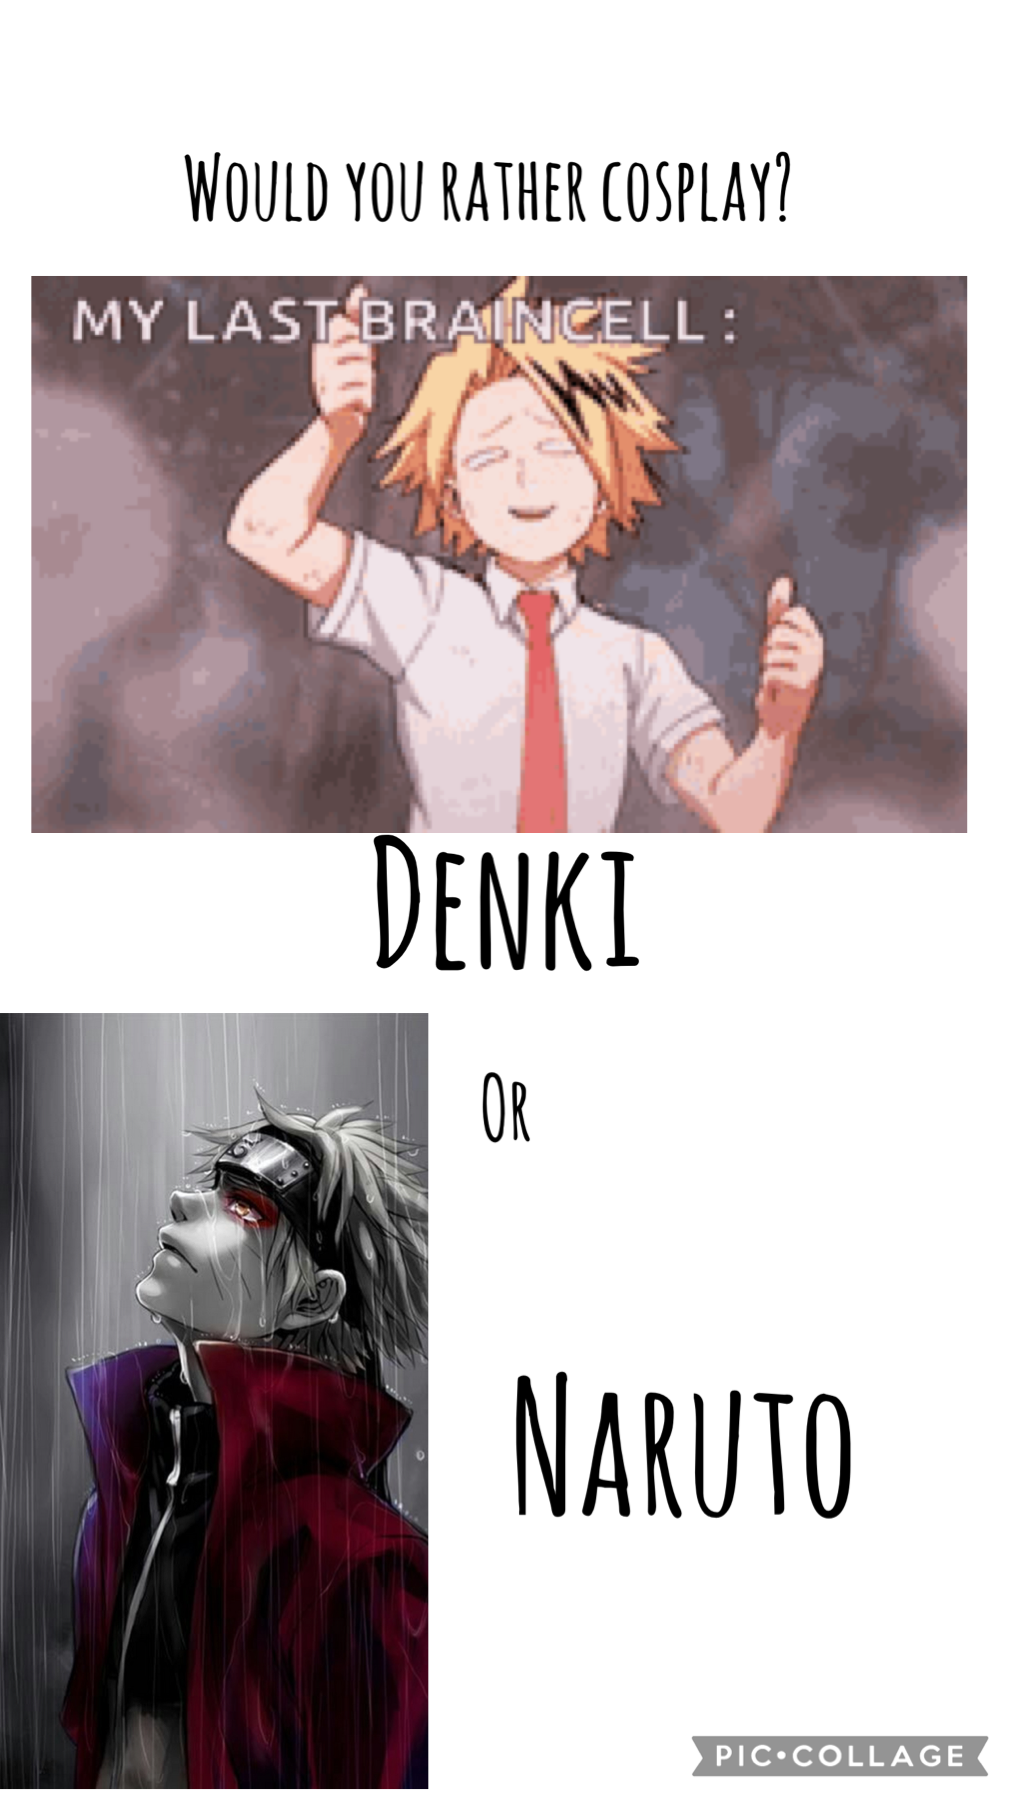 Would you rather cosplay Denki or Naruto??